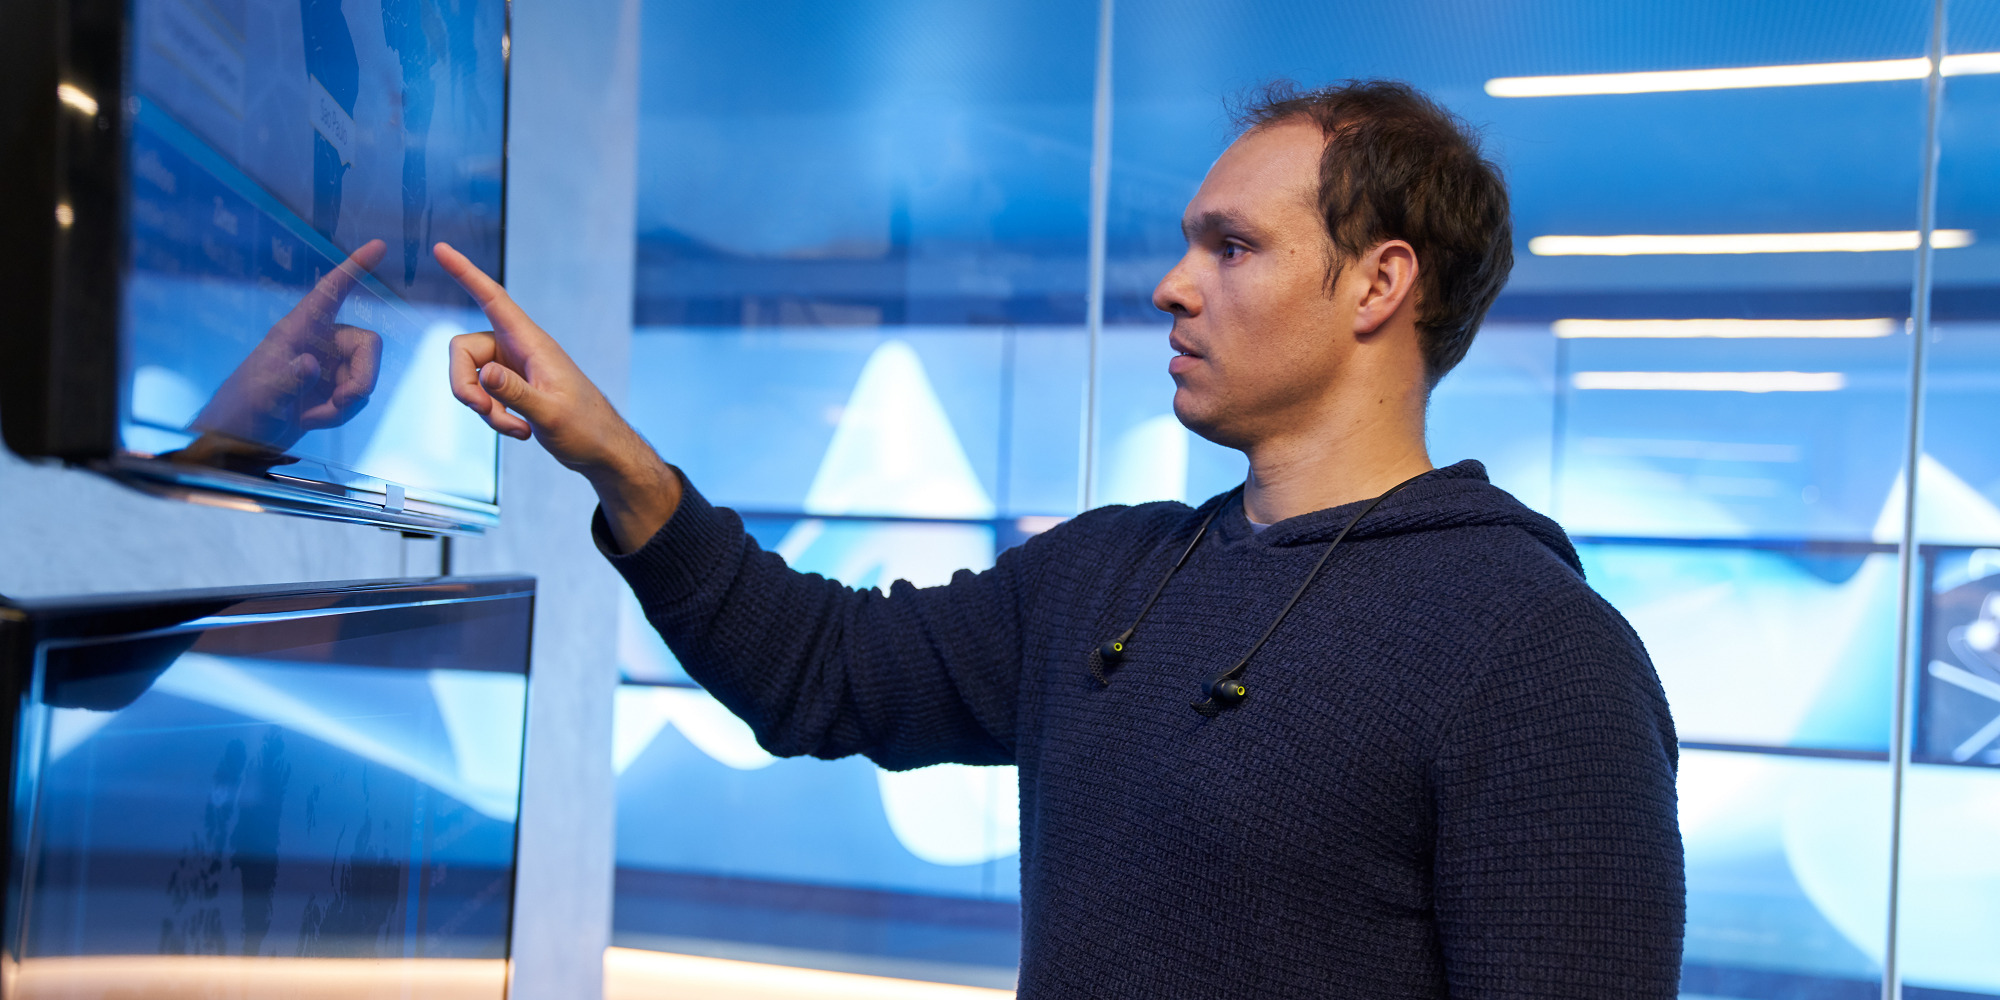 Man in a hooded sweater/sweatshirt inside a secure room, pointing at a geographic area displayed on a large monitor